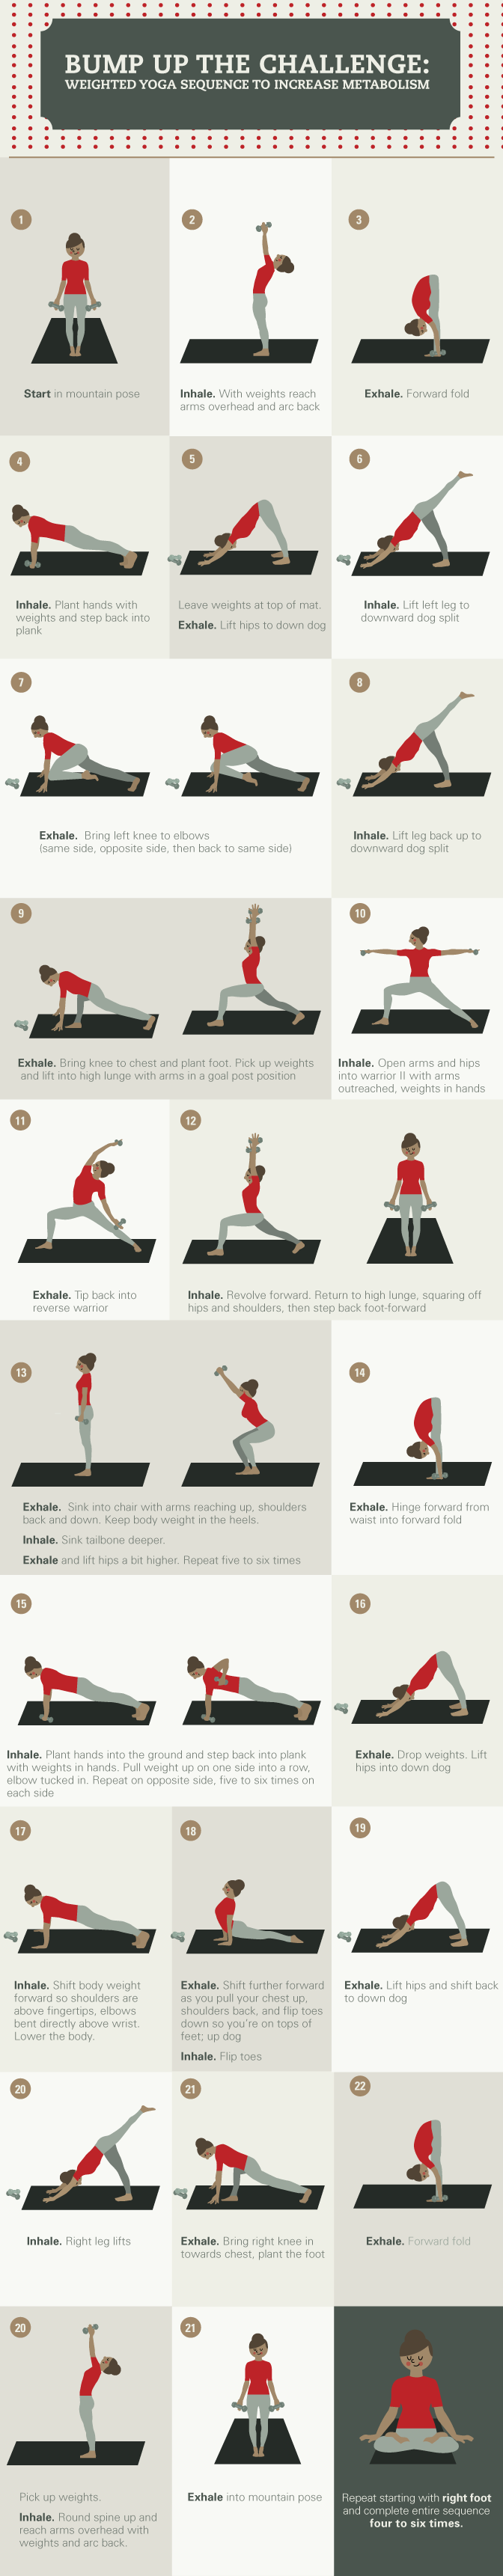 The Best Yoga Pose for Weight Loss, Yoga Instructors Explain - Parade